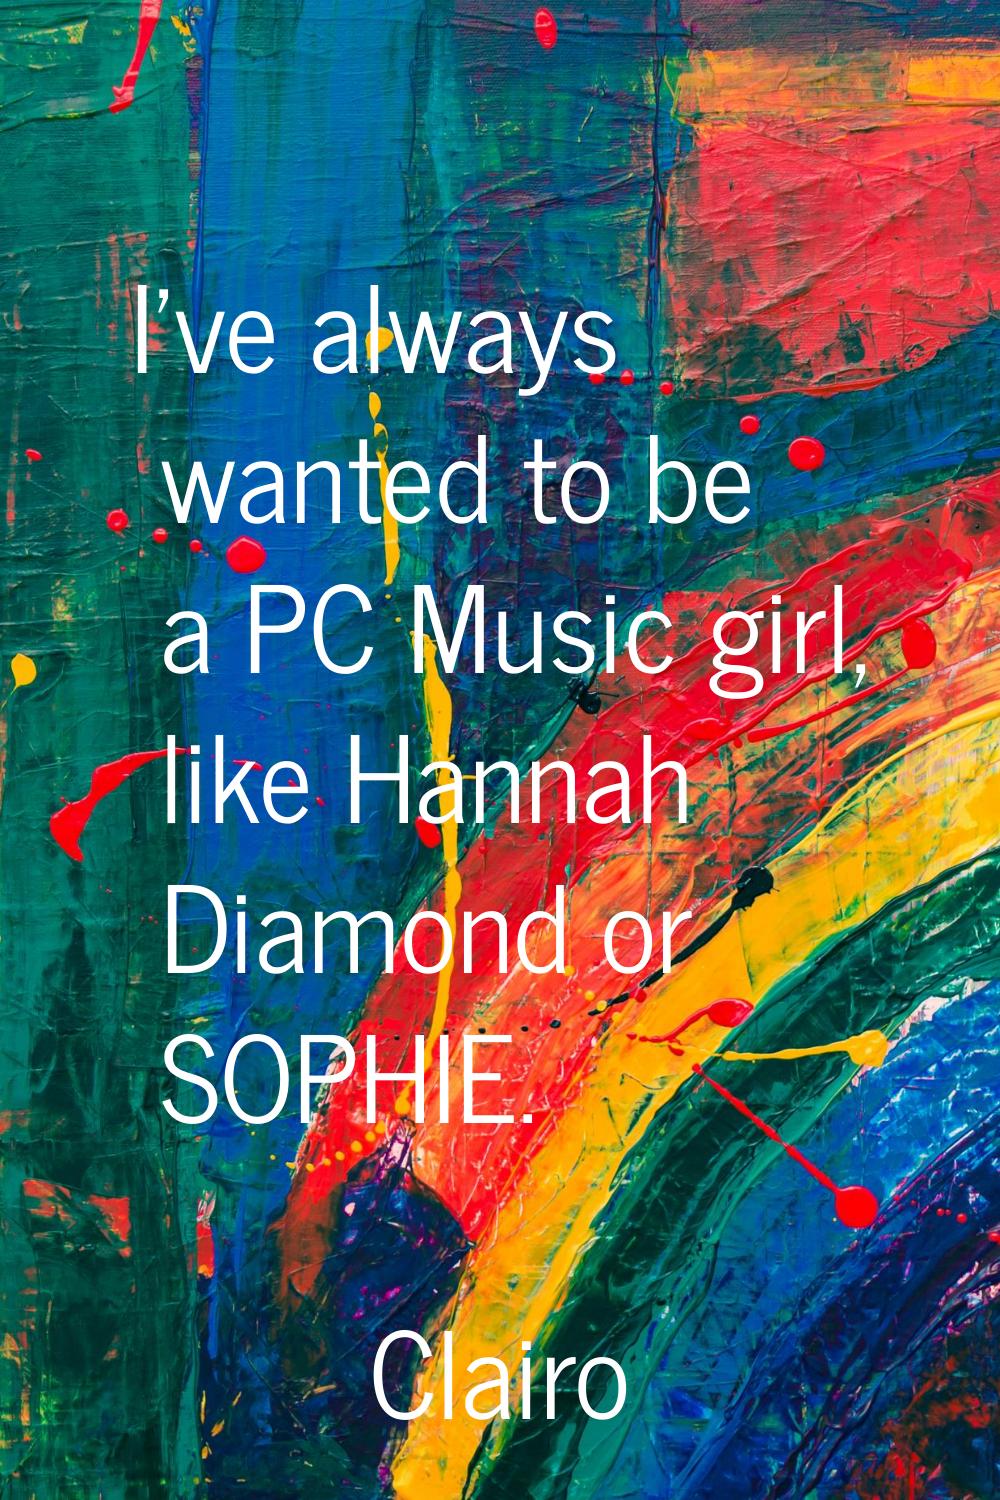 I've always wanted to be a PC Music girl, like Hannah Diamond or SOPHIE.